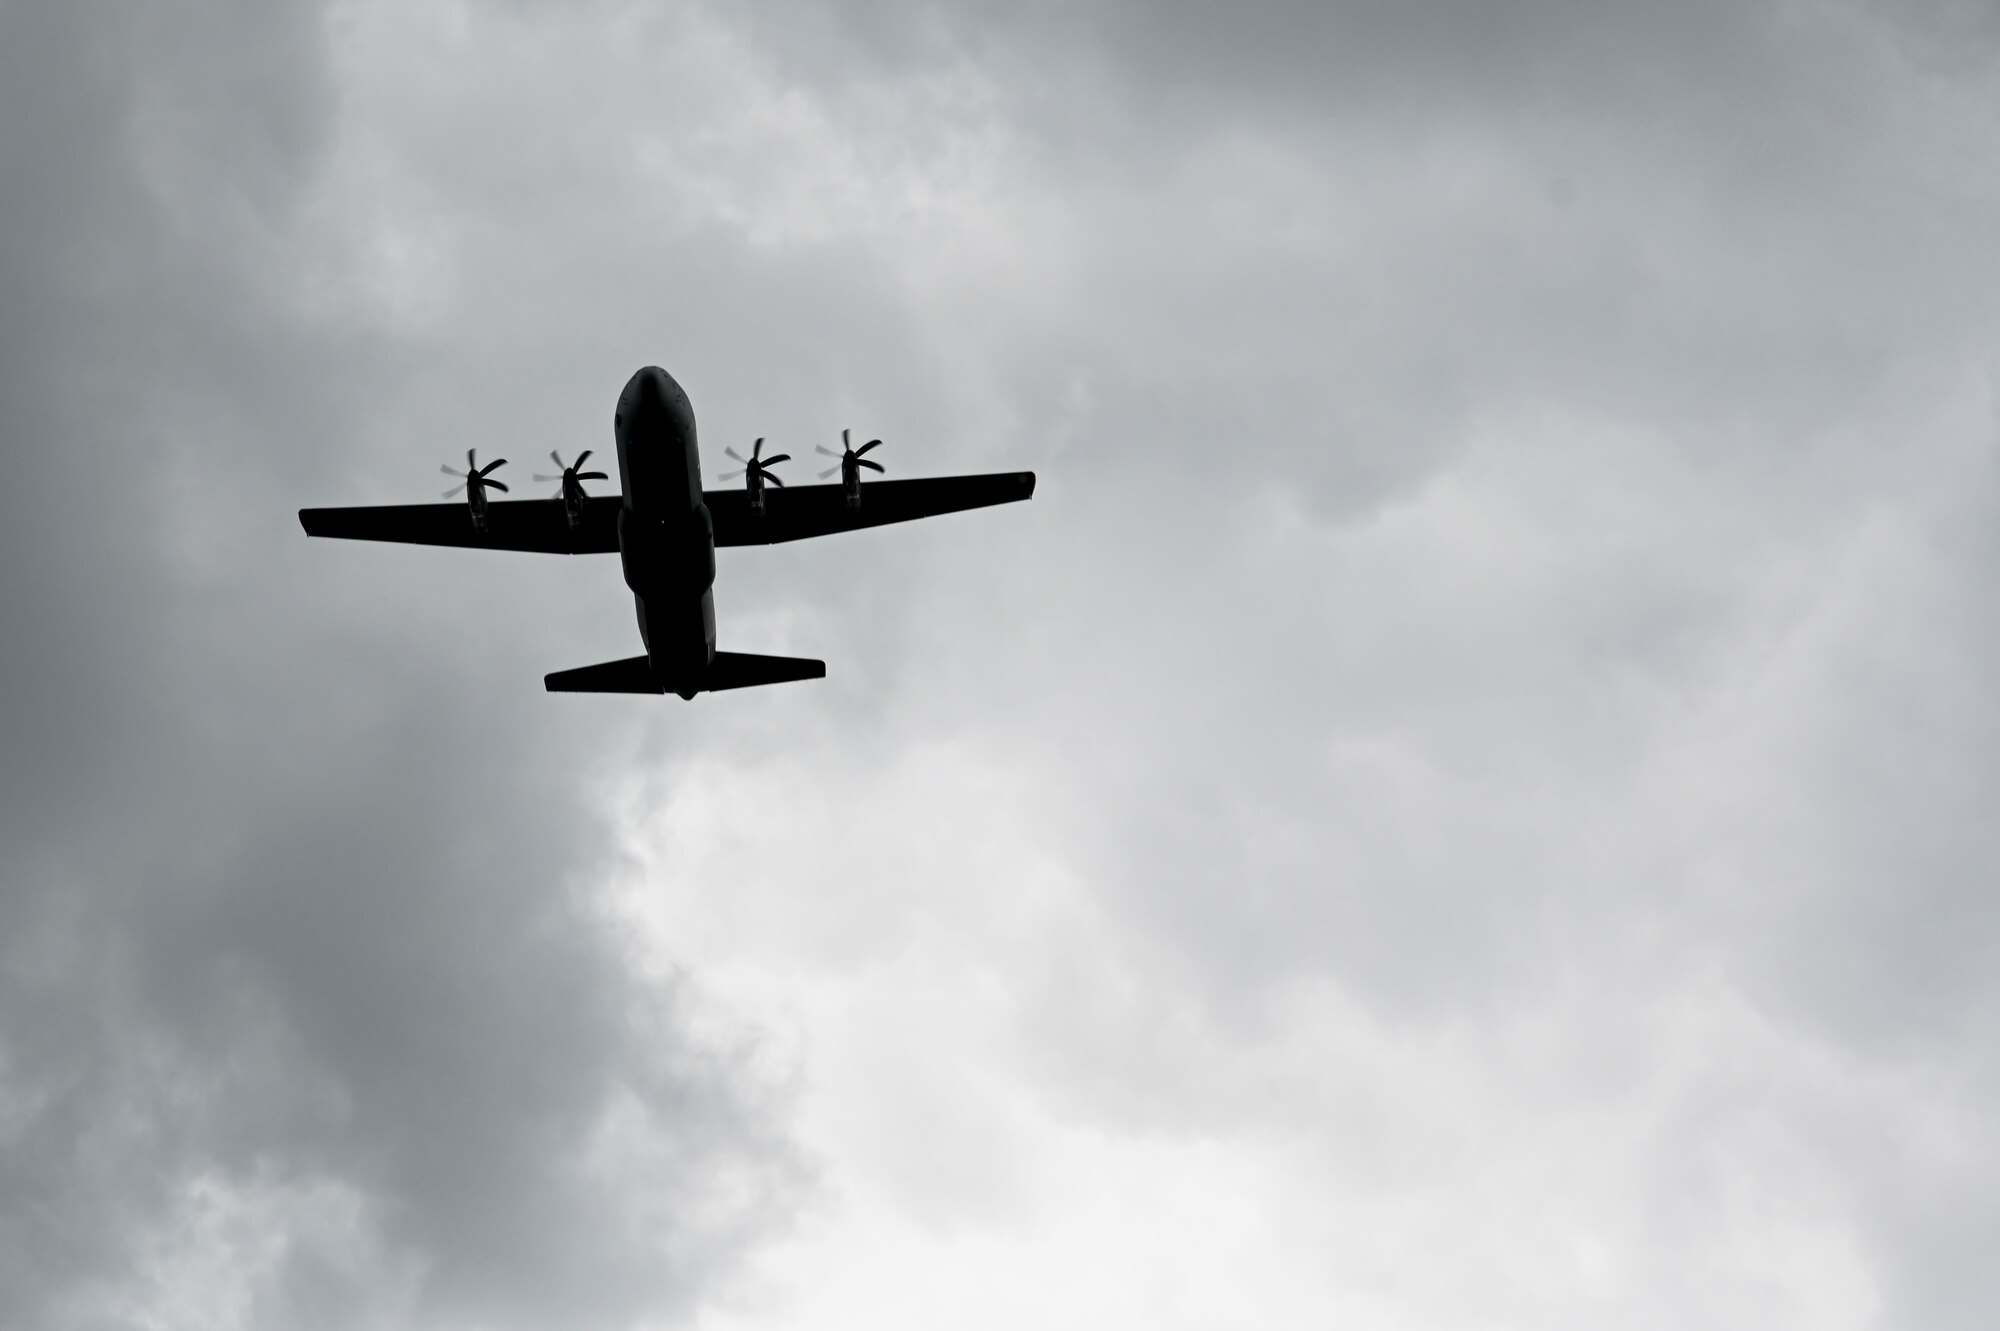 A C130-J Hercules, assigned to the 37th Airlift Squadron, Ramstein Air Base, Germany, flies over the Luxembourg American Military Cemetery in Luxembourg, during a Memorial Day event on May 28, 2022. This event is held to honor and recognize the service and sacrifice of over 5,000 Americans. (U.S. Air Force photo by Airman 1st Class Jessica Sanchez-Chen)